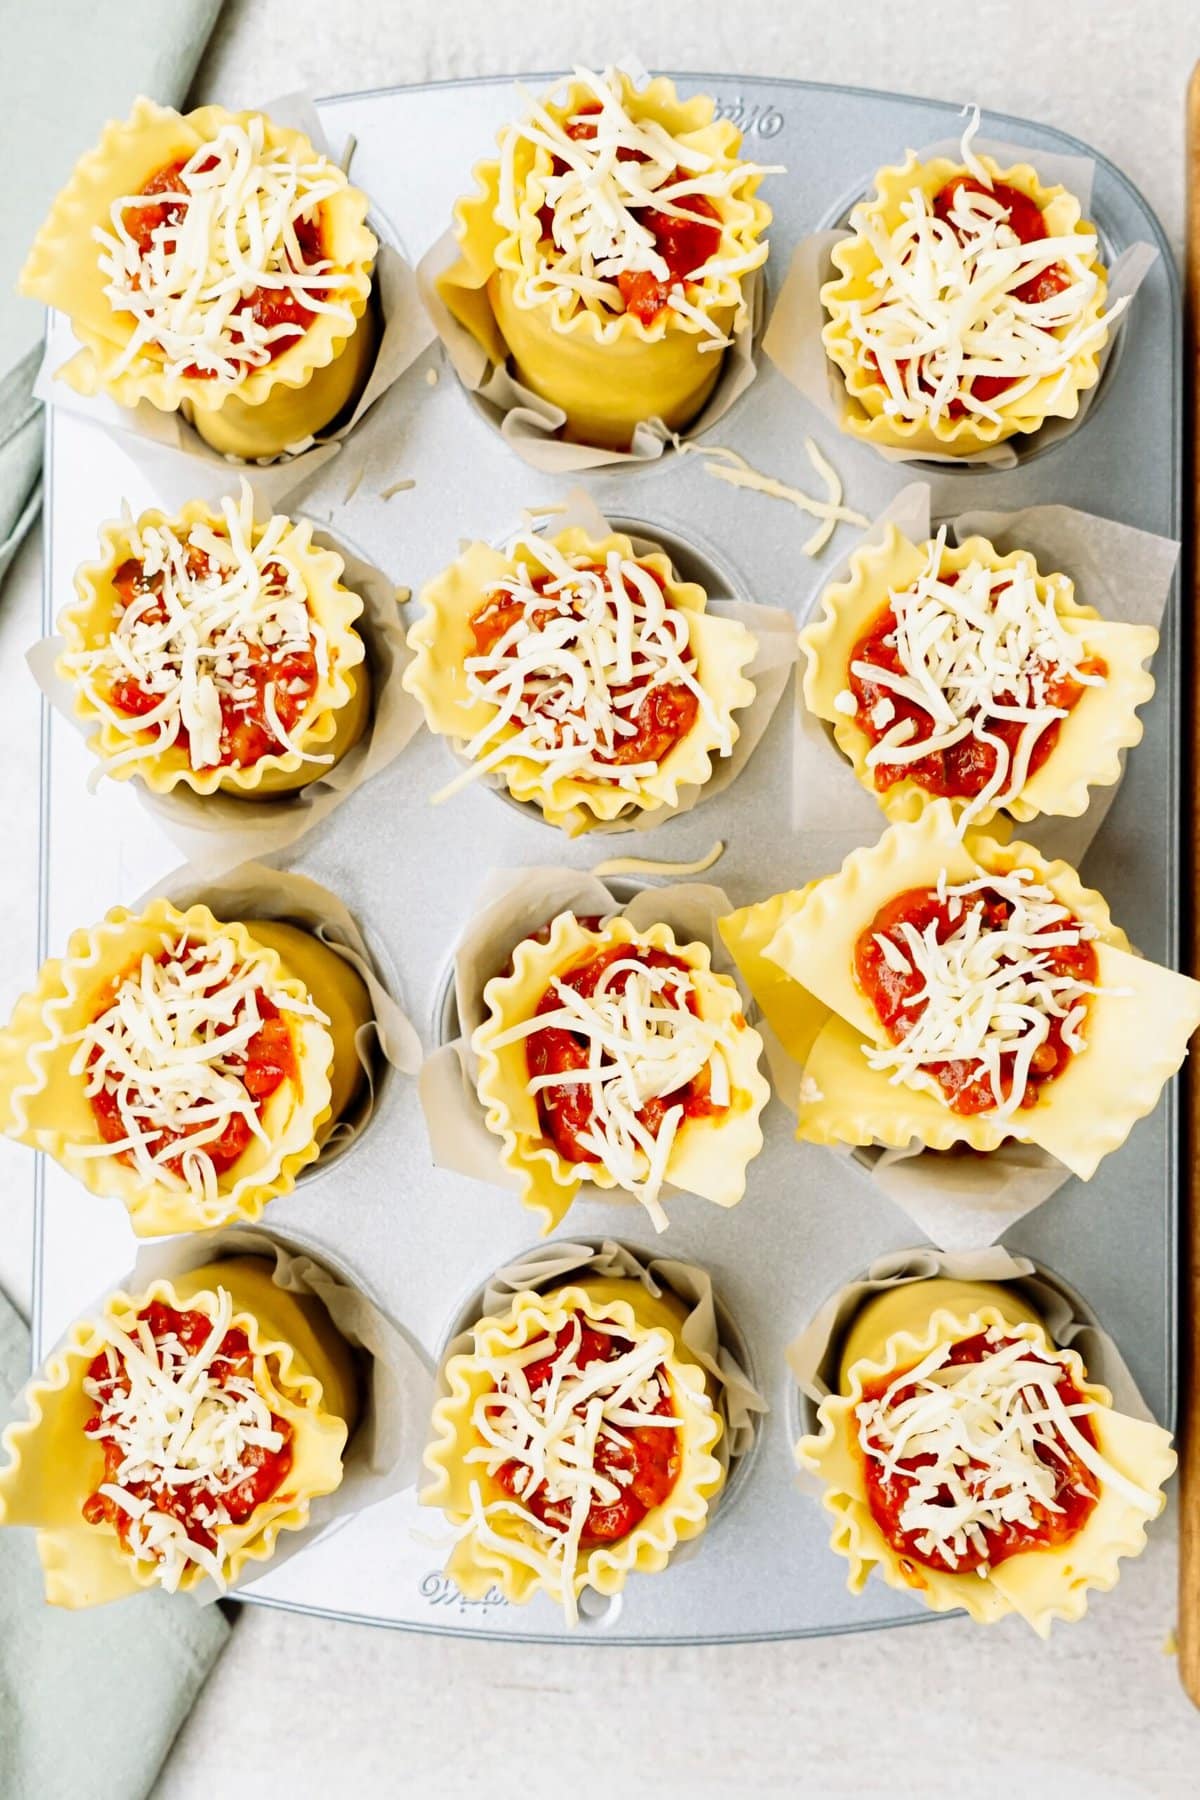 A muffin tin filled with lasagna cups topped with tomato sauce and shredded cheese, ready for baking.